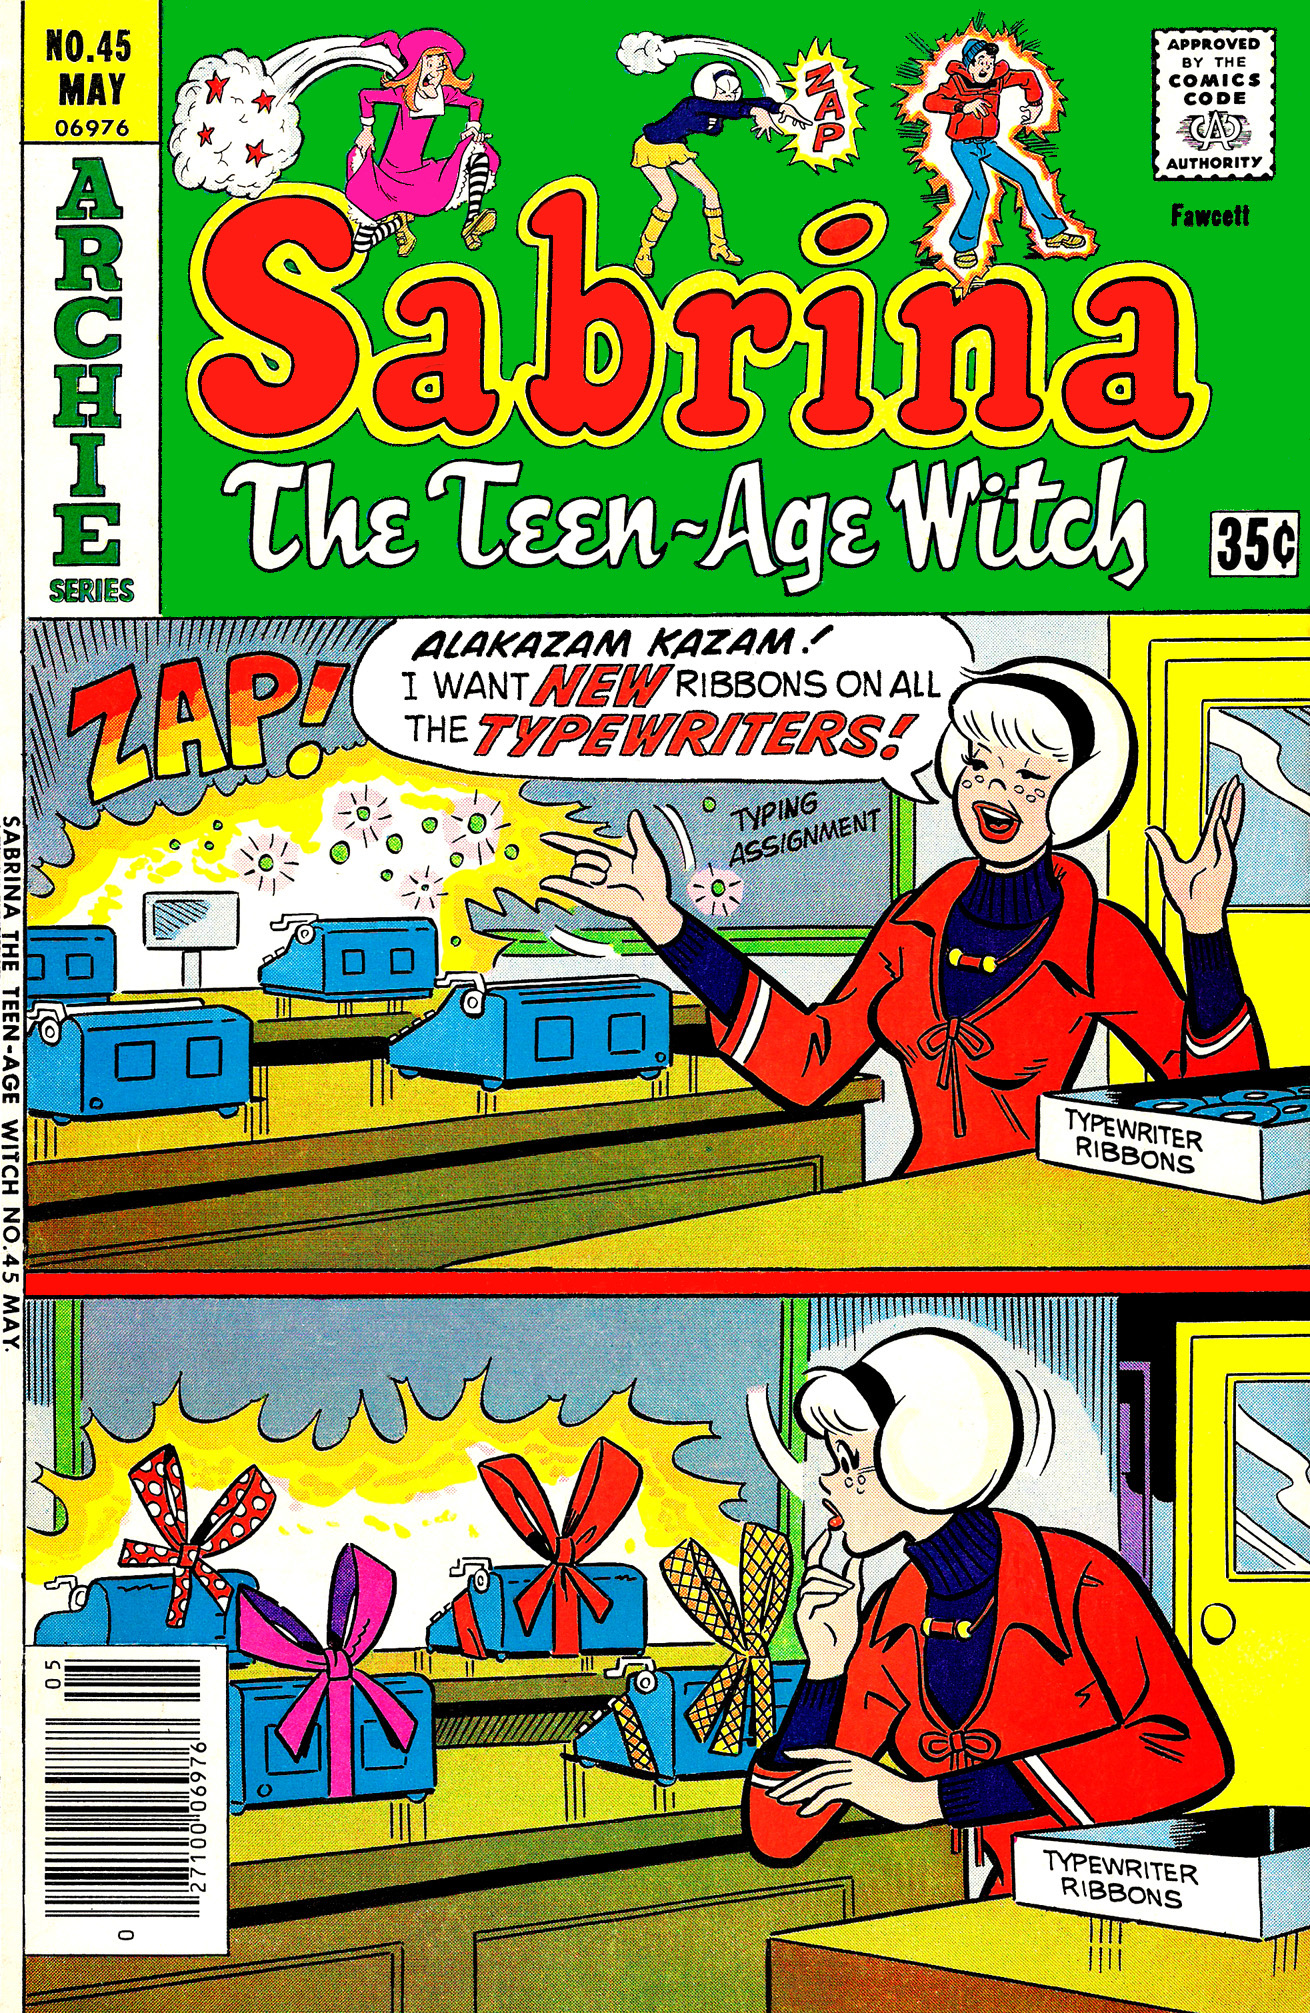 Sabrina The Teenage Witch (1971) Issue #45 #45 - English 1